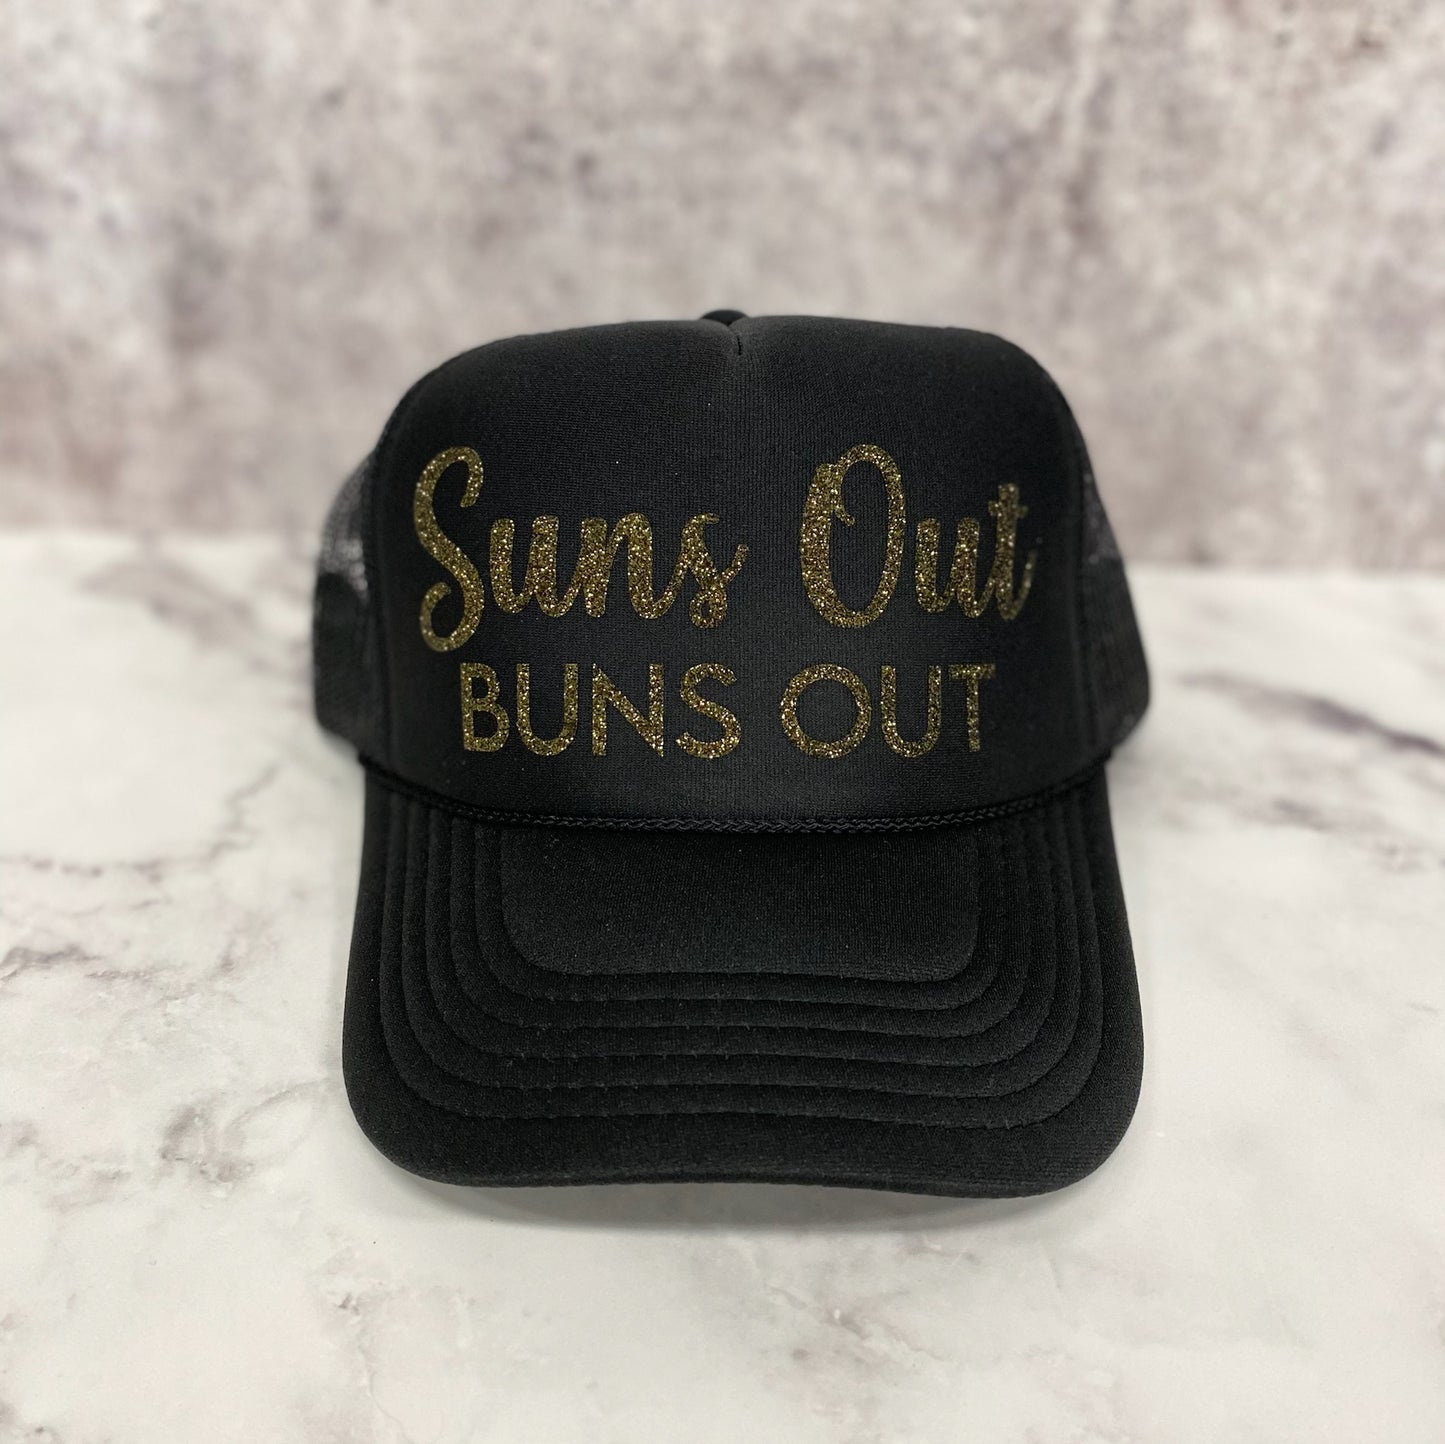 Suns Out Buns Out Trucker